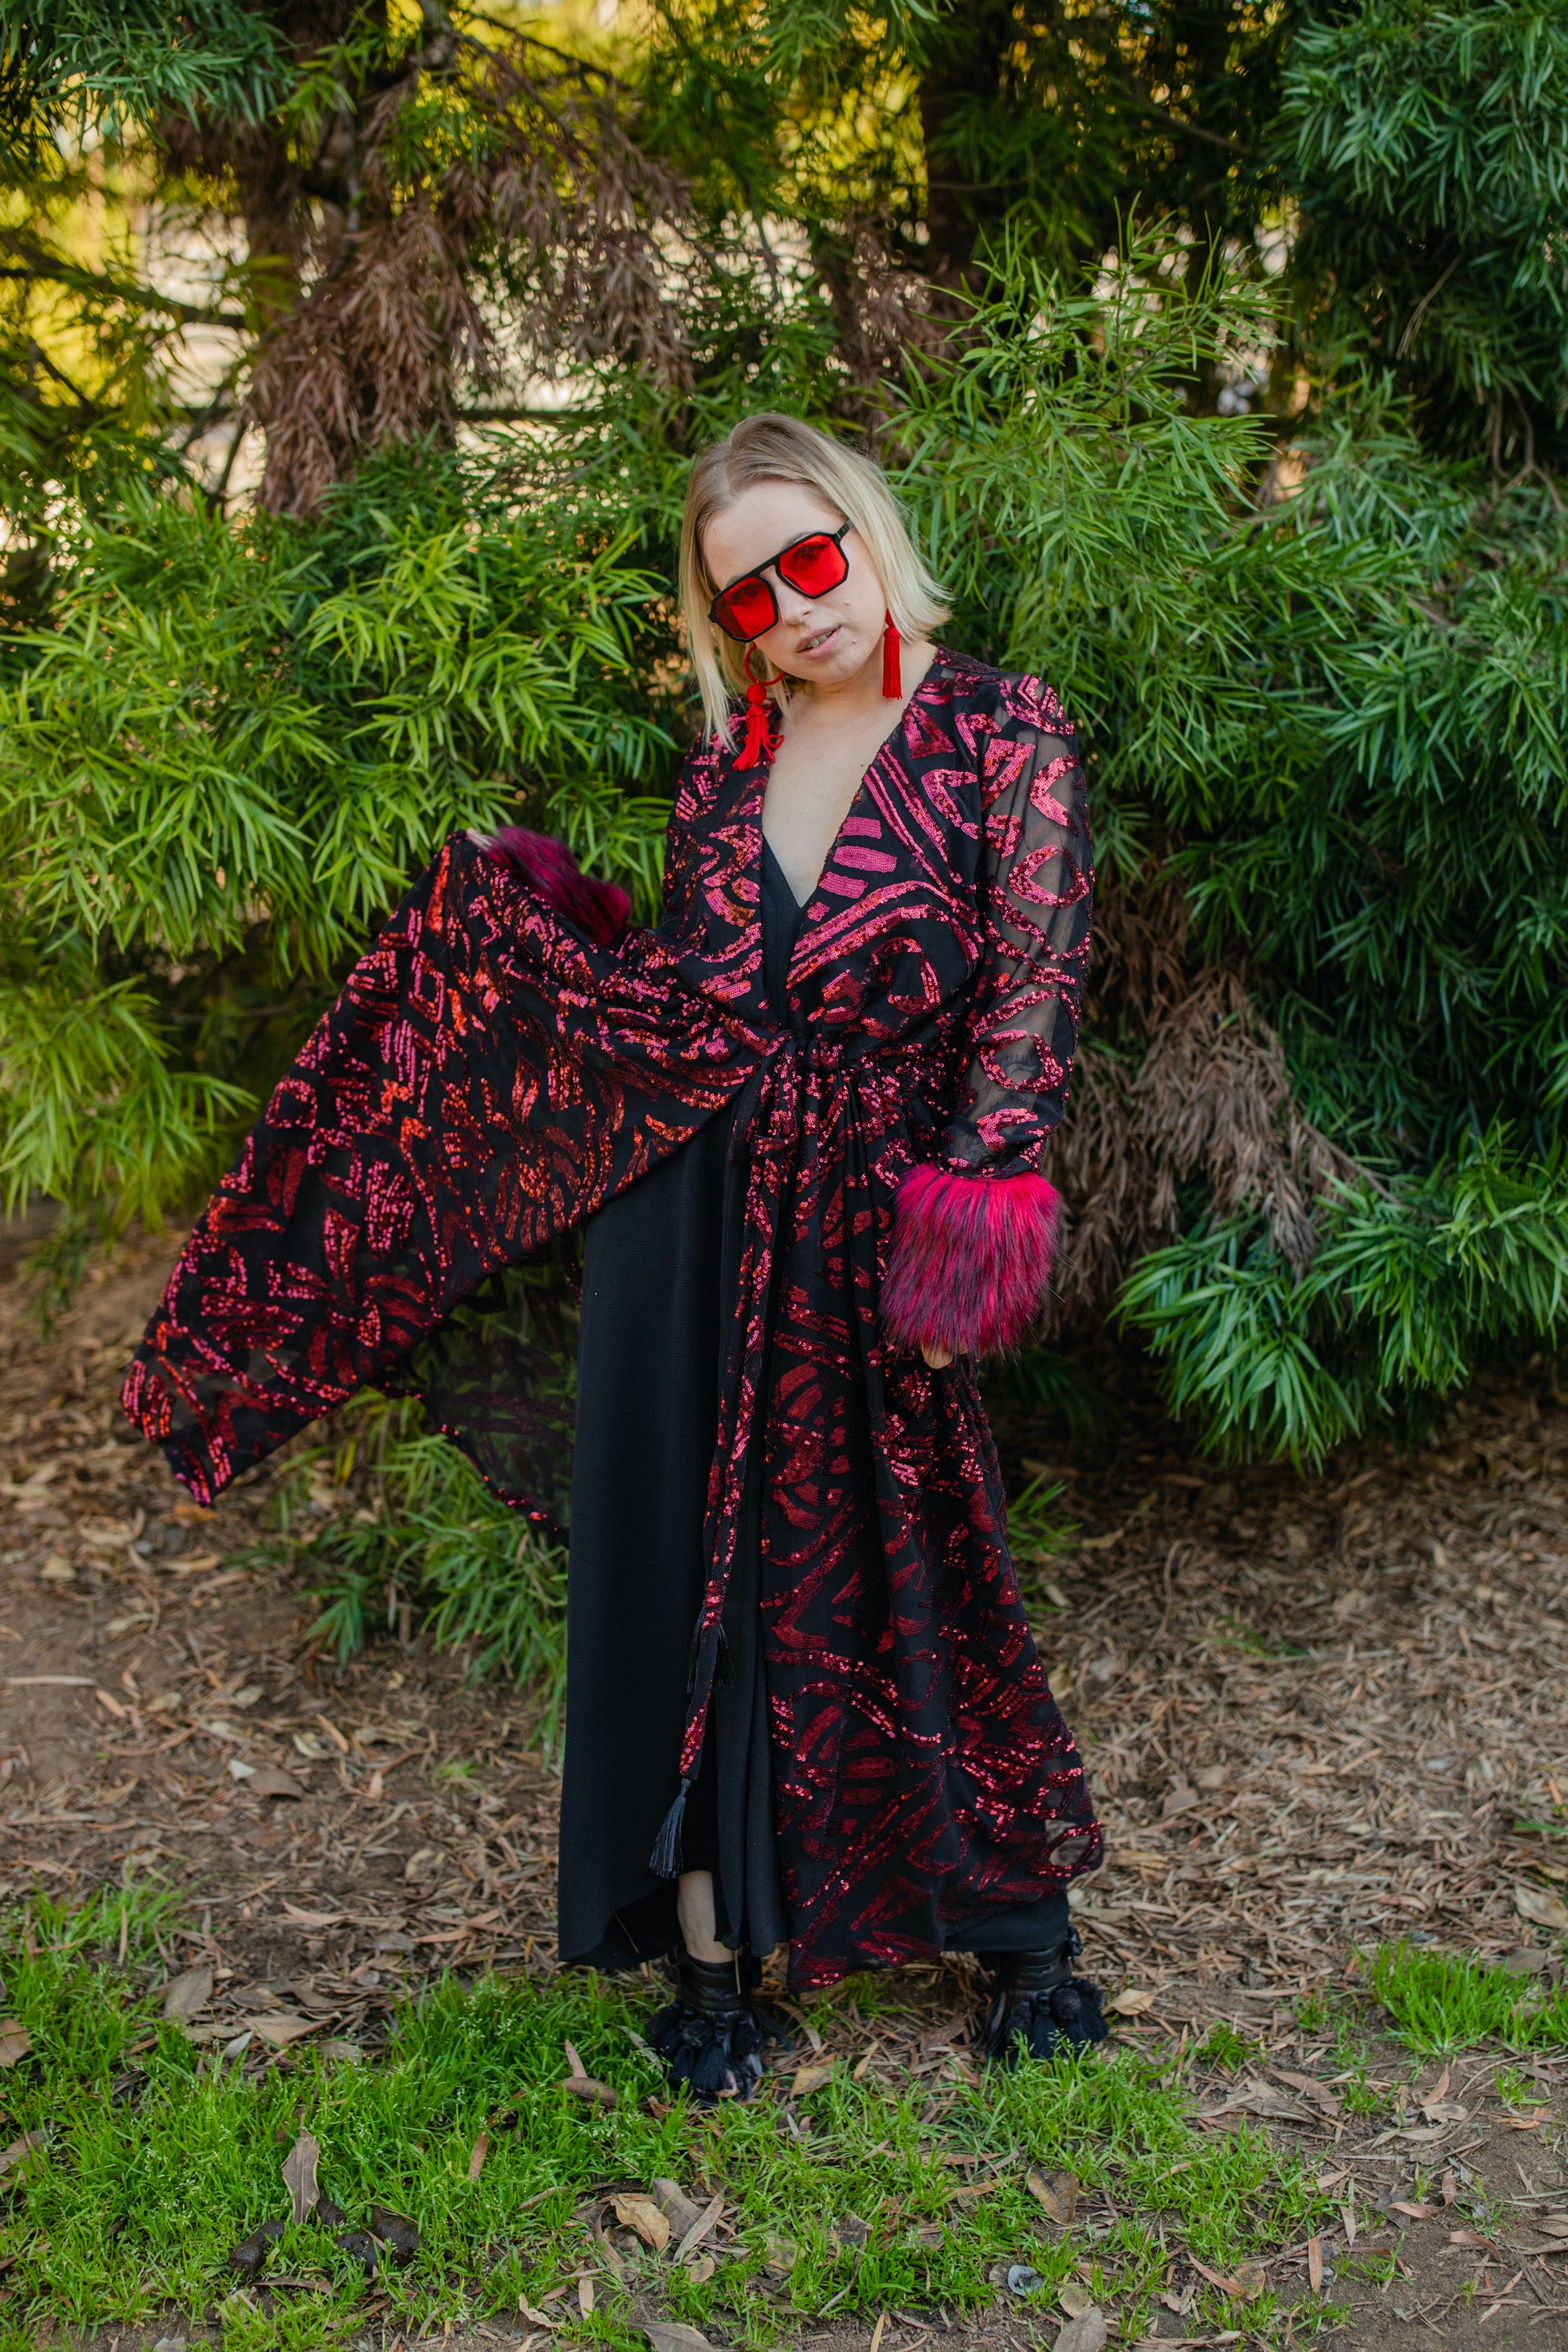 jennafer grace Ruby sequin faux fur cuff duster jacket retro 70s red sequined black mesh goth gothic boho bohemian old hollywood glam unisex handmade in California USA